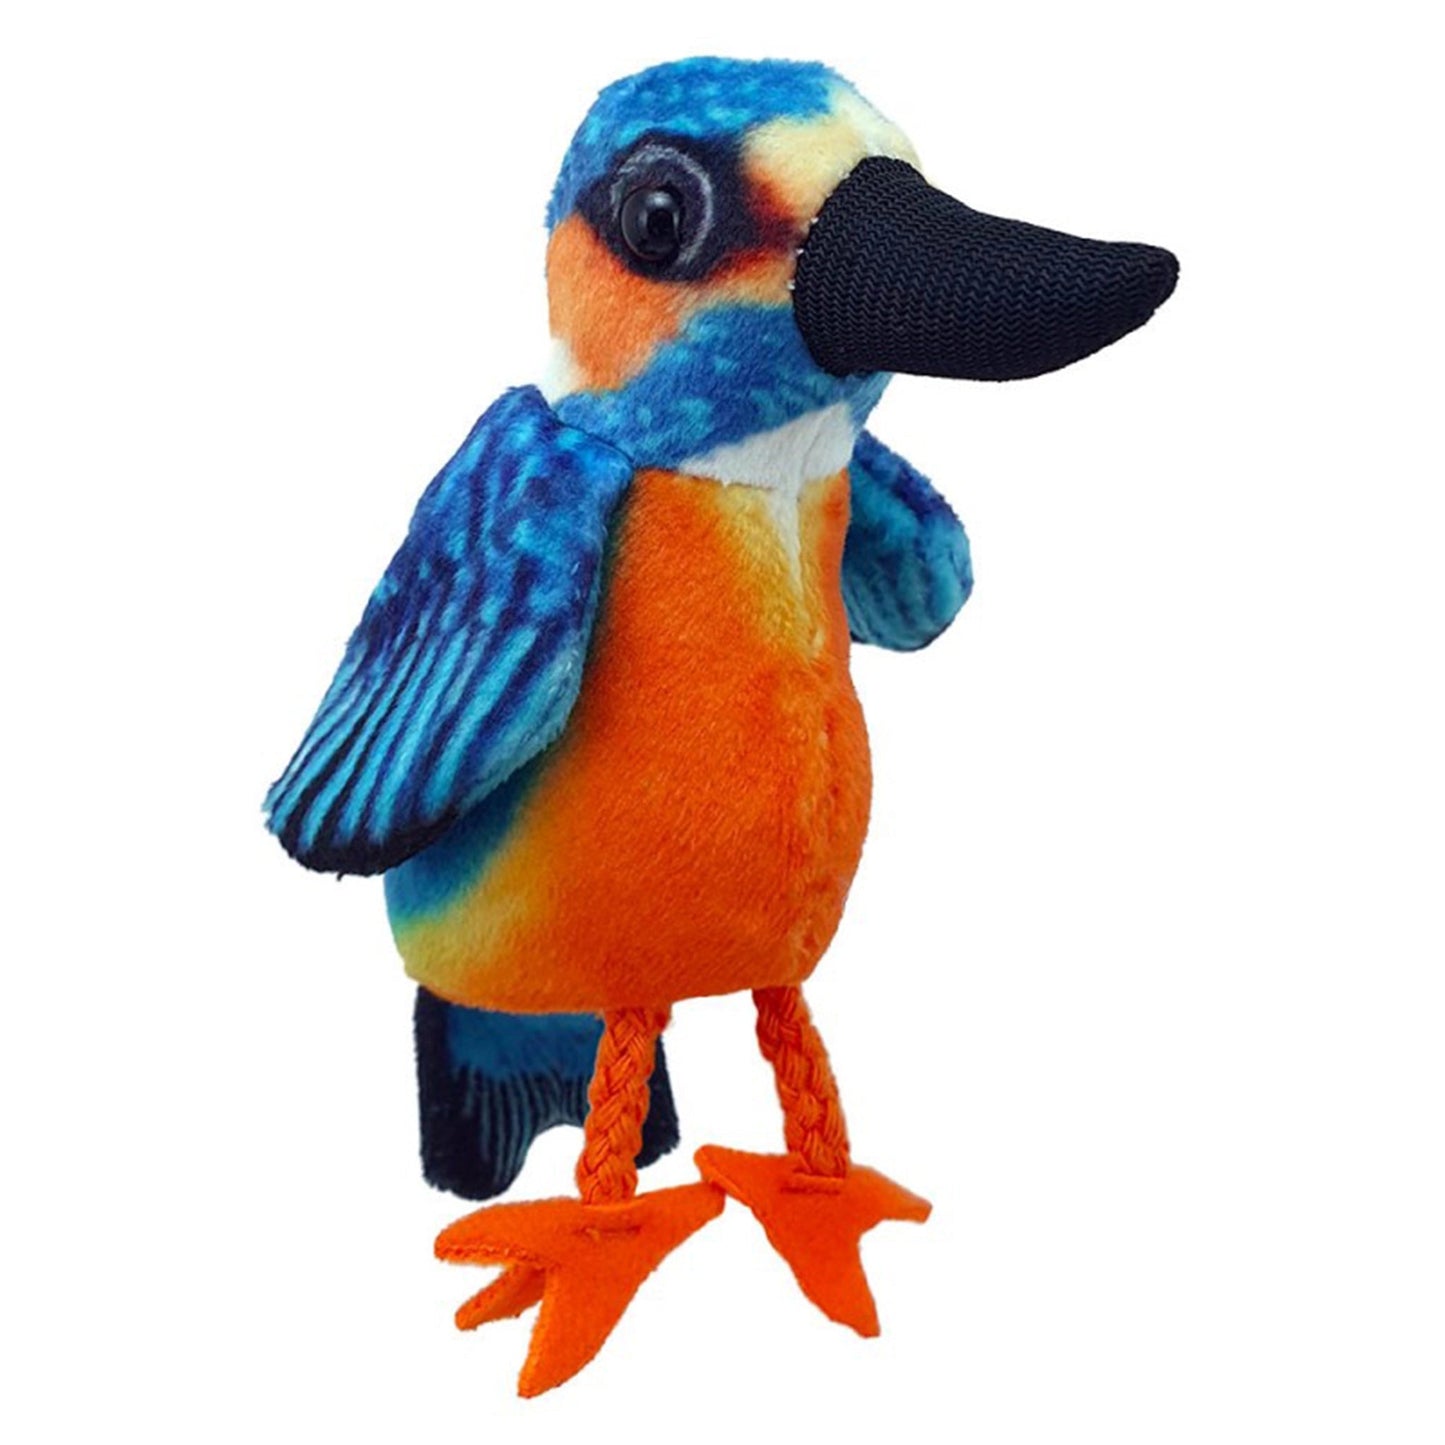 Kingfisher Finger Puppet - The Puppet Company - The Forgotten Toy Shop